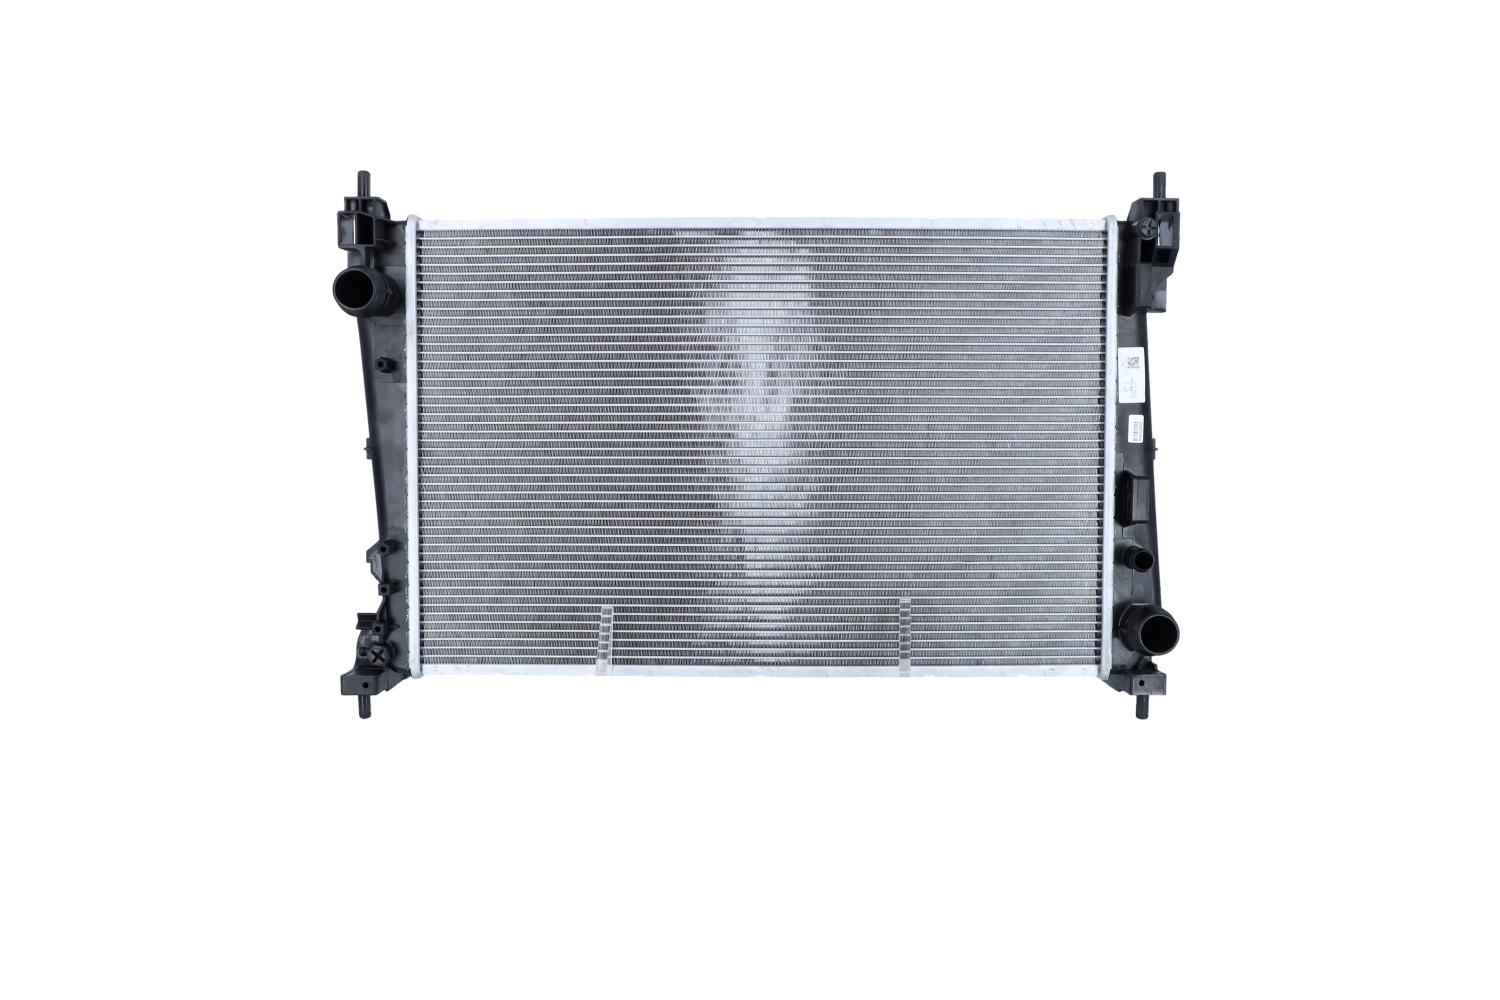 NRF EASY FIT 53454 Engine radiator Aluminium, 619 x 397 x 26 mm, with seal ring, Brazed cooling fins